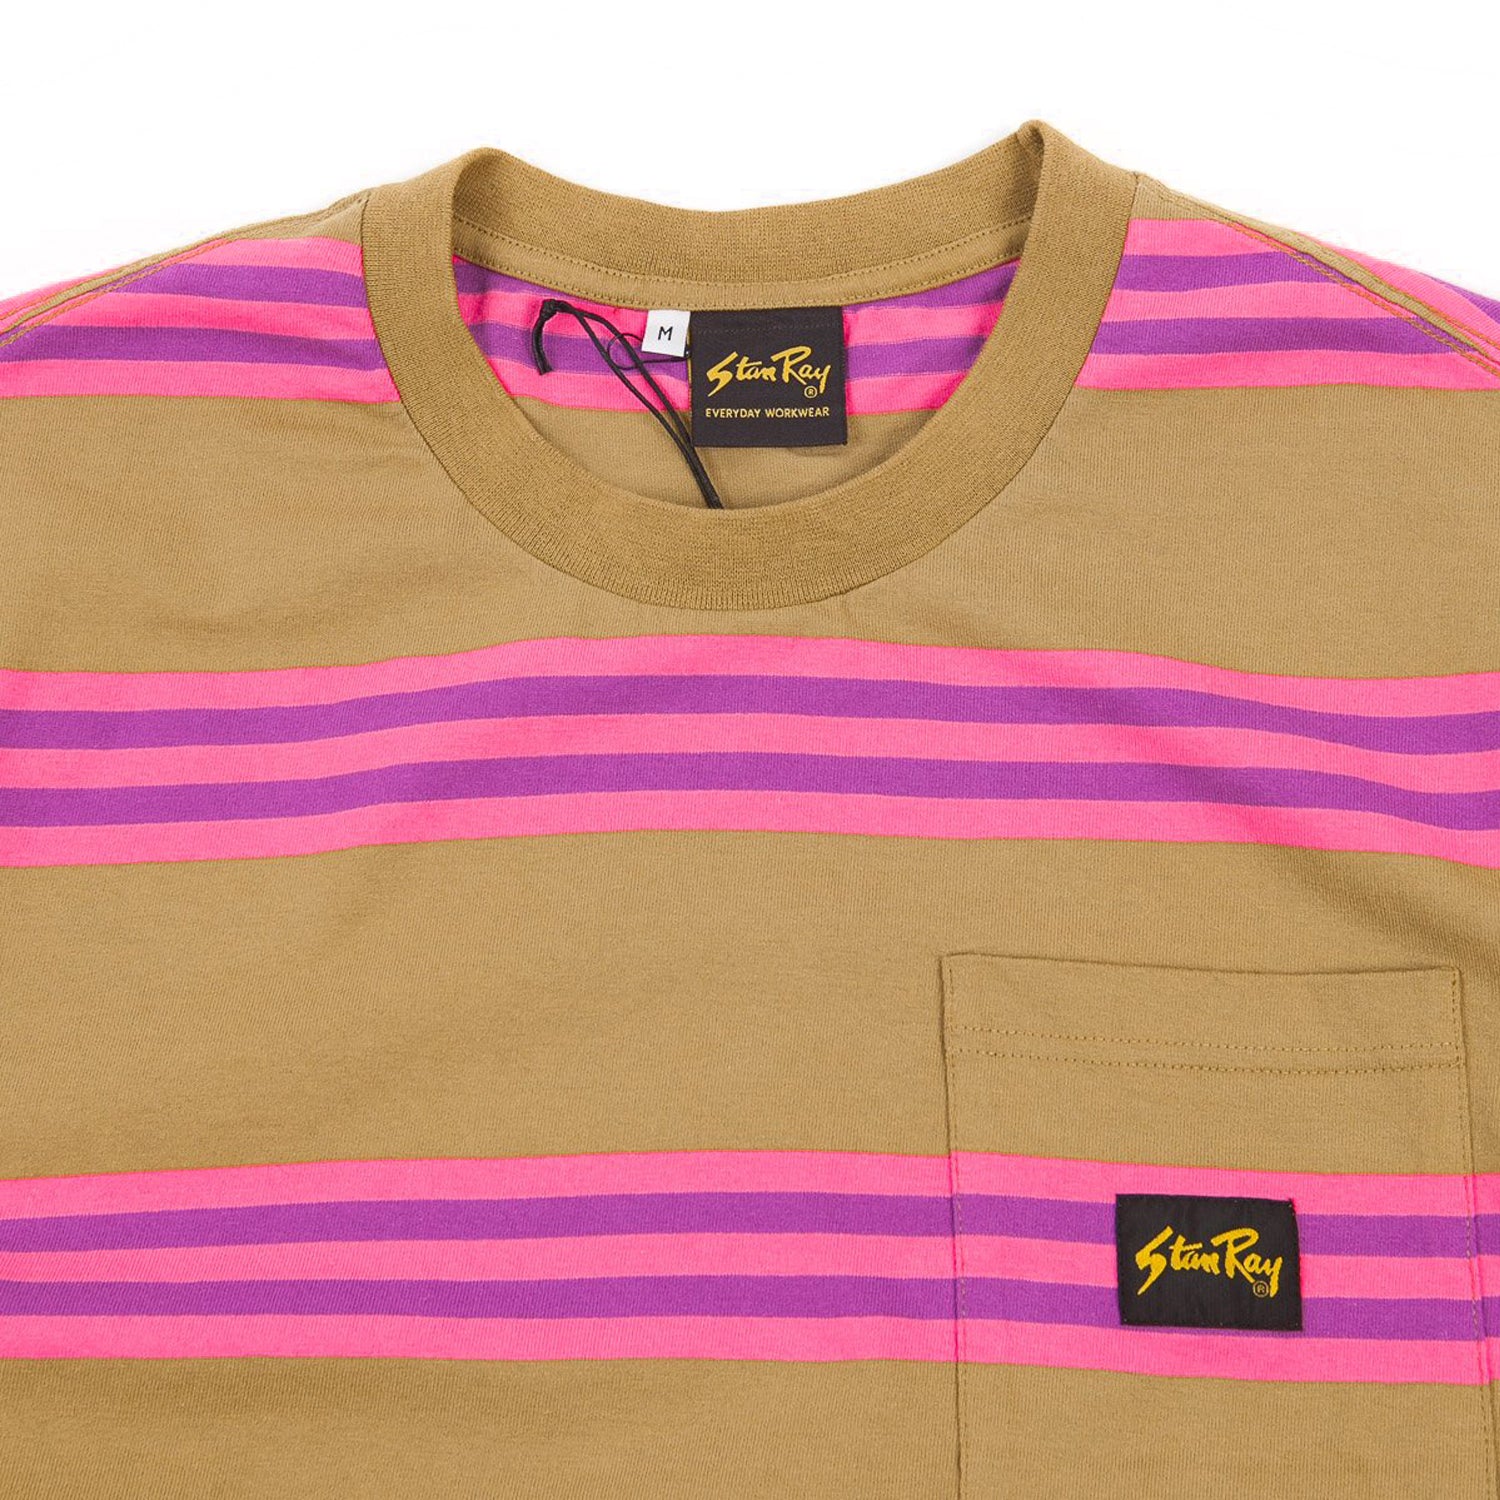 Stan Ray S/S Football Tee Washed Pink